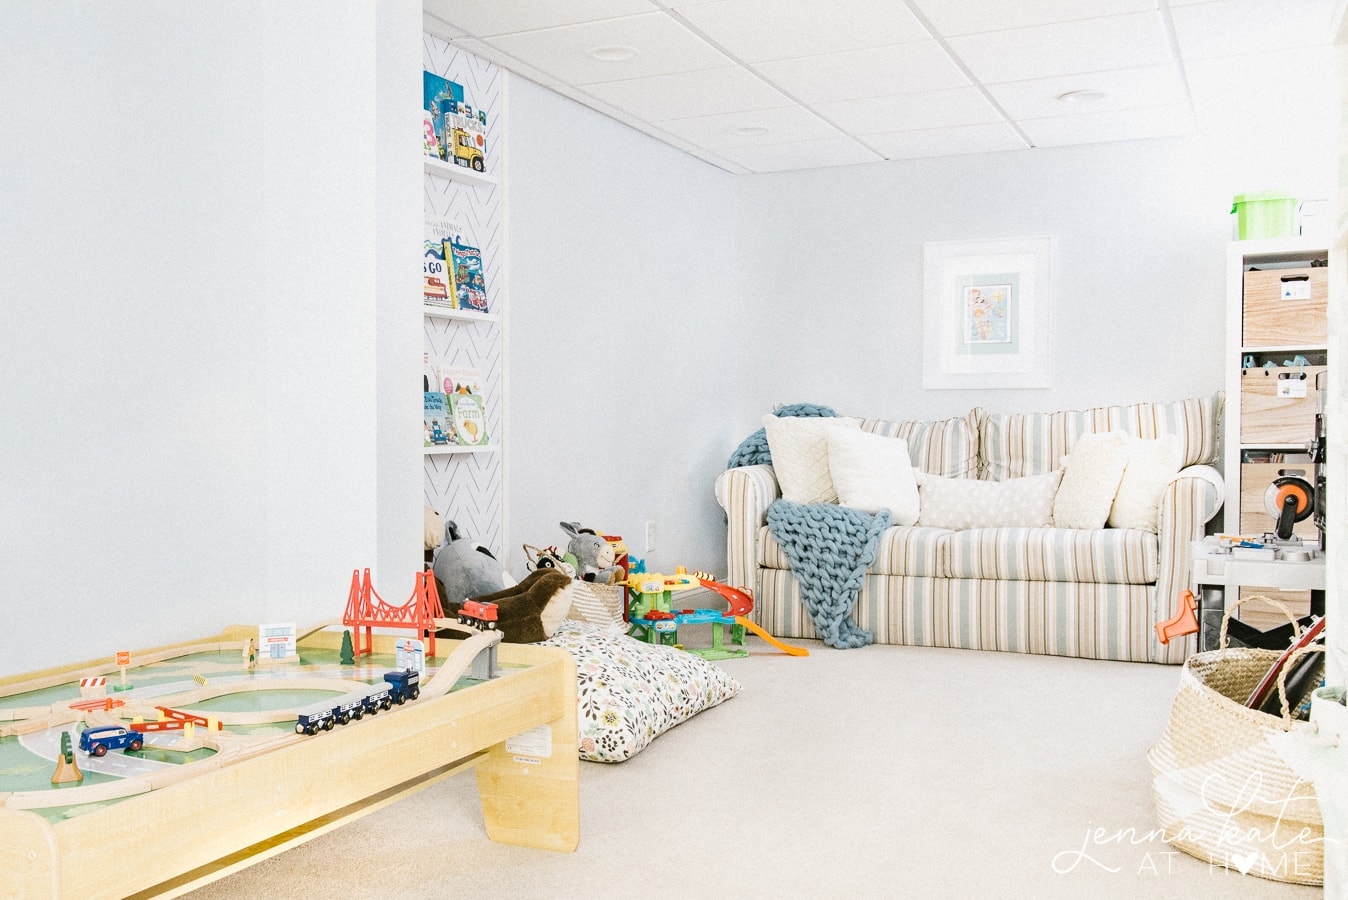 How to set up a playroom for toddlers that's organized and free of clutter